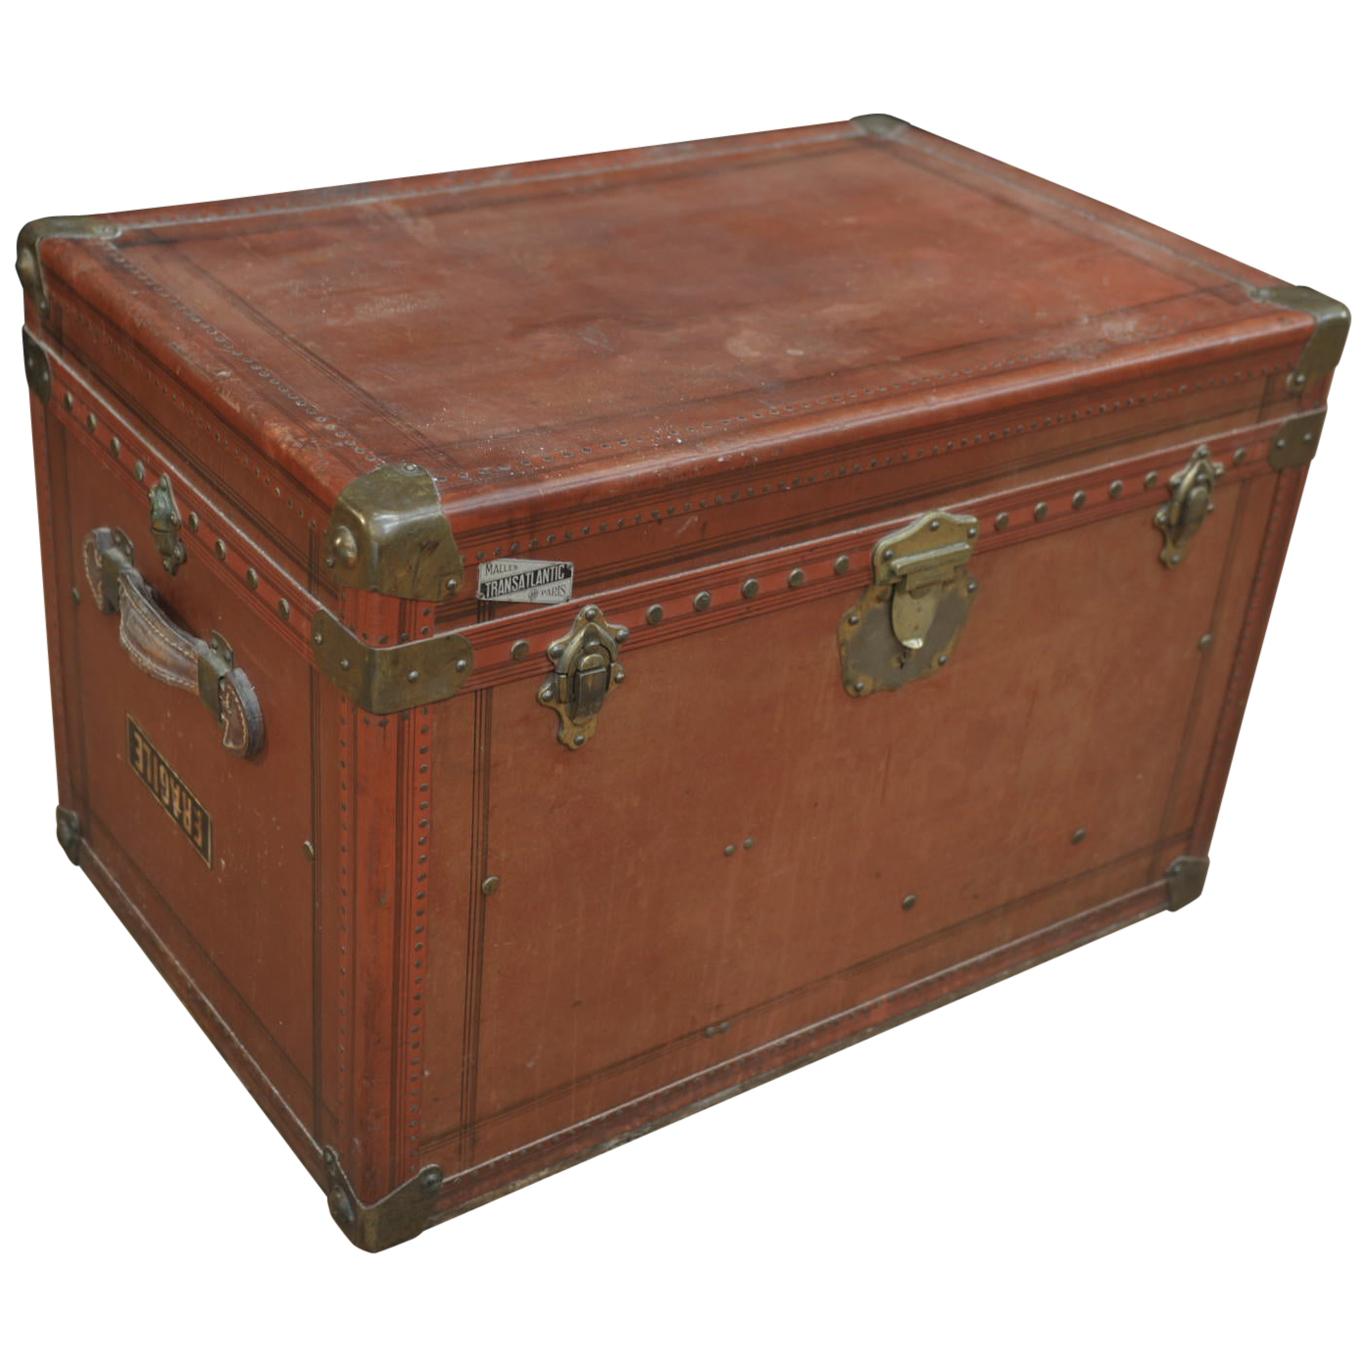 French Transatlantic Paris Traveling Trunk with 2 Inside Compartment, circa 1920 For Sale